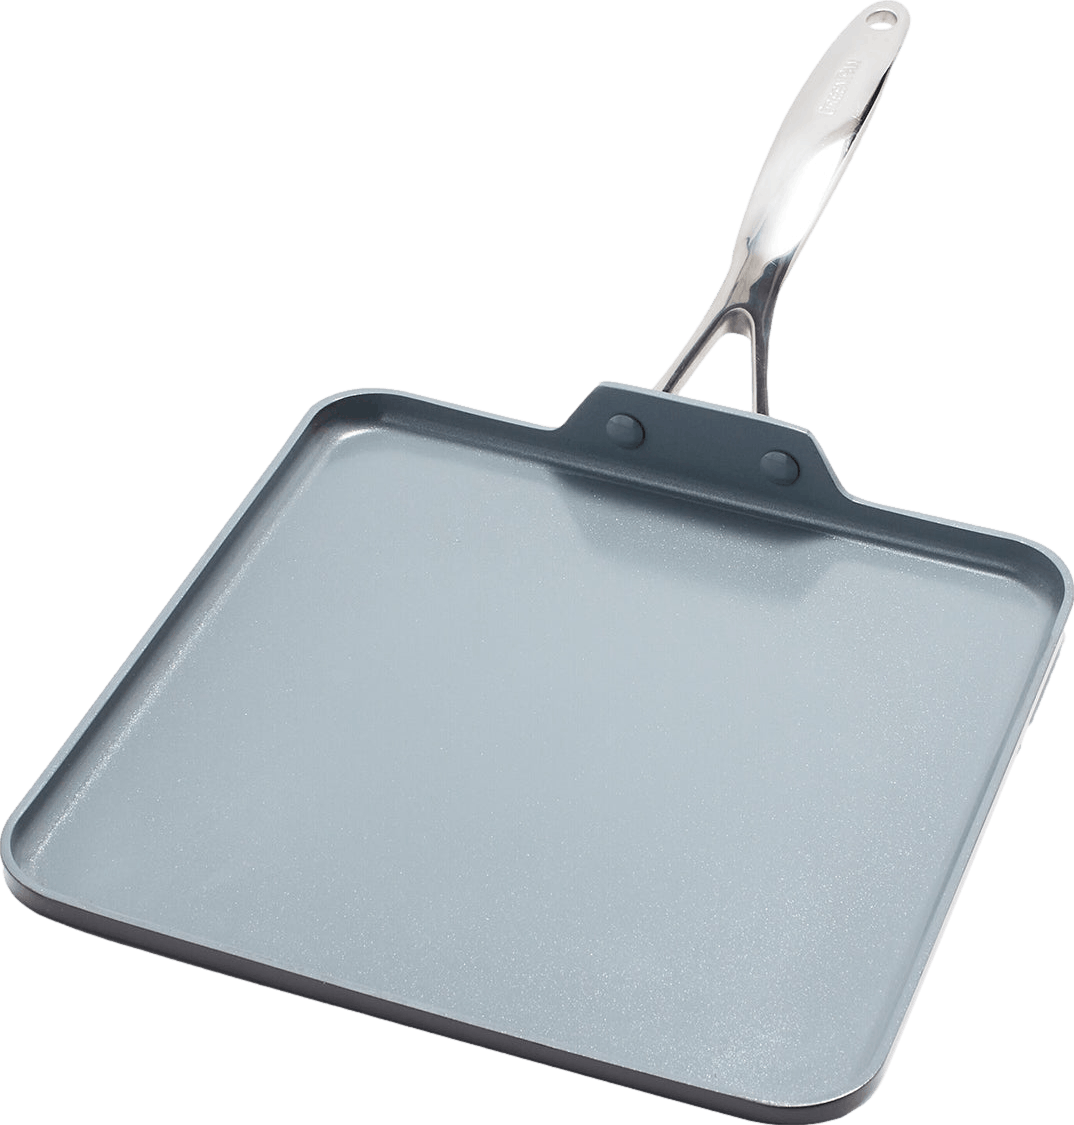 All-Clad B1 Hard Anodized Nonstick 11-Inch Flat Square Griddle 